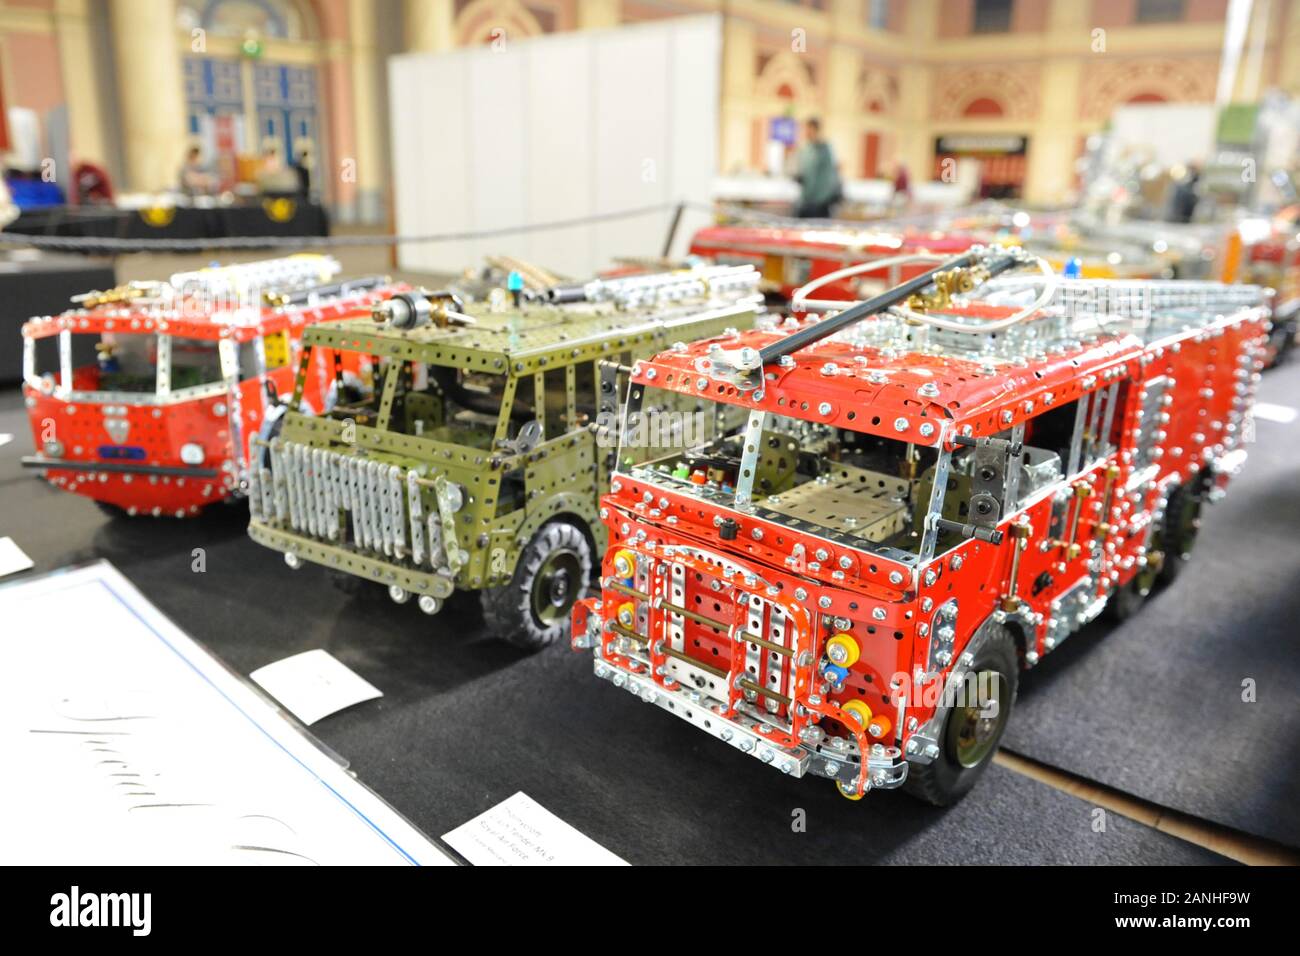 Meccano models on display on the opening day of the London Model Engineering Exhibition opened today at Alexandra Palace, London.  The models are part of the collection of Warwick District Councillor and retired chartered Mechanical Engineer George Illingworth who is displaying 30 of his hand-built large 1/12 scale Meccano Fire Engines from his 60+ magnificent collection.  The show is one of the largest modelling exhibitions in the UK, blending the full spectrum of model creation from traditional model engineering, steam locomotives and traction engines through to more modern gadgets and ‘boys Stock Photo